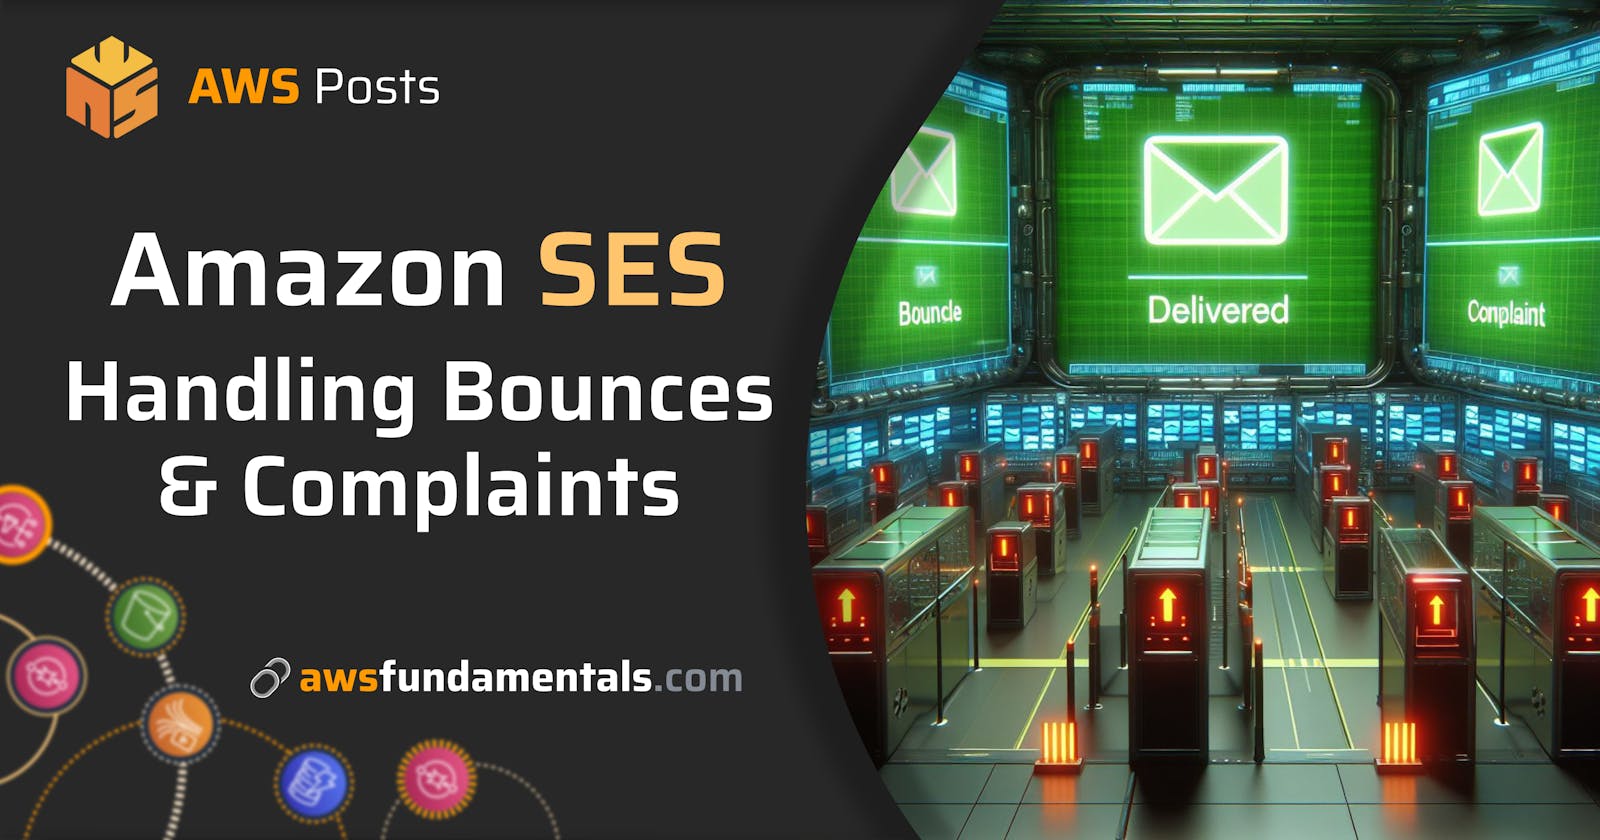 Handling Bounces and Complaints at Amazon SES